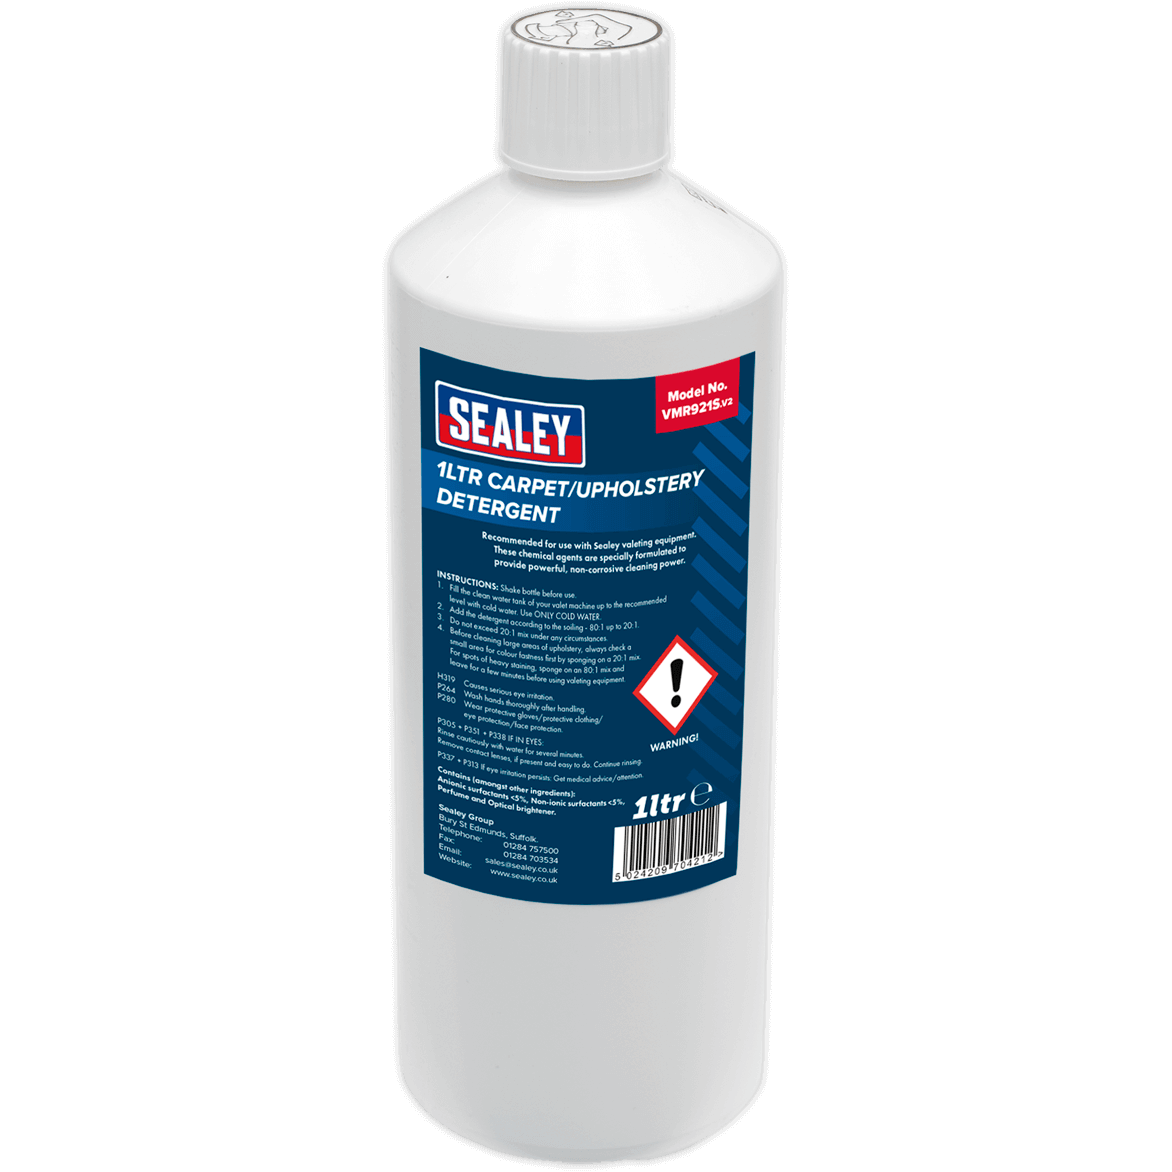 Image of Sealey Carpet and Upholstery Detergent 1l